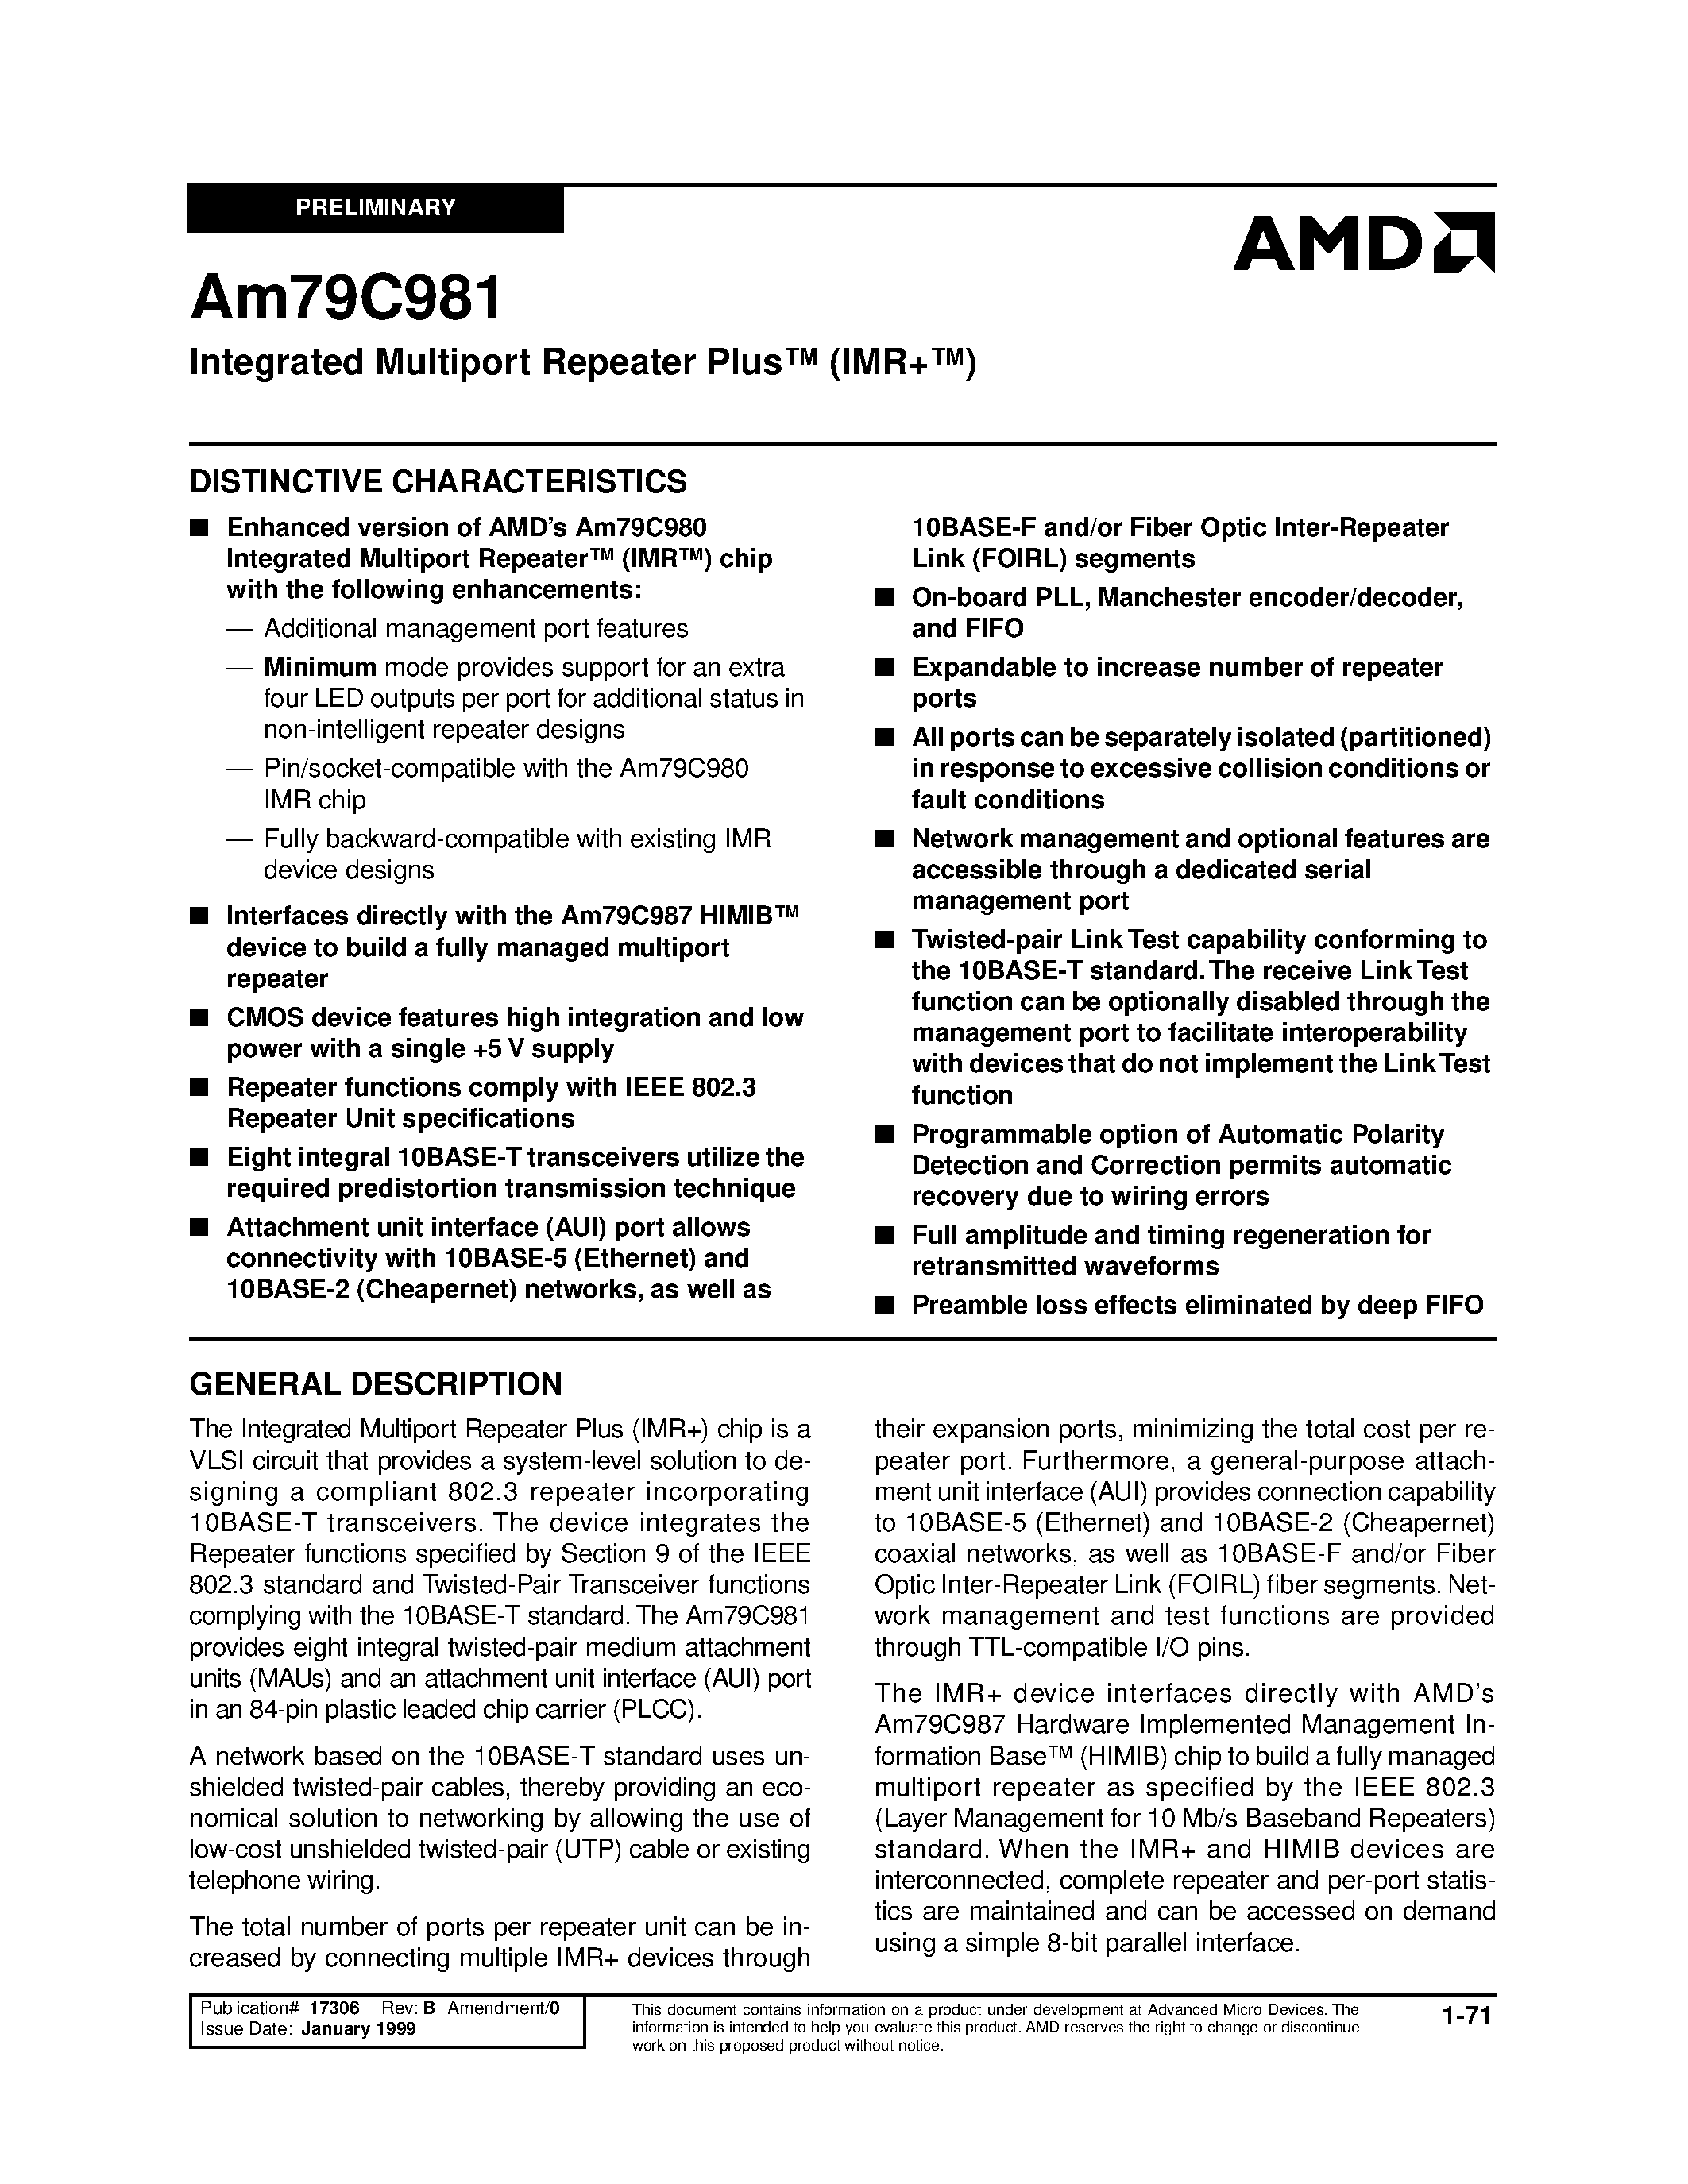 Datasheet AM79C981 - Integrated Multiport Repeater Plus (IMR+) page 1